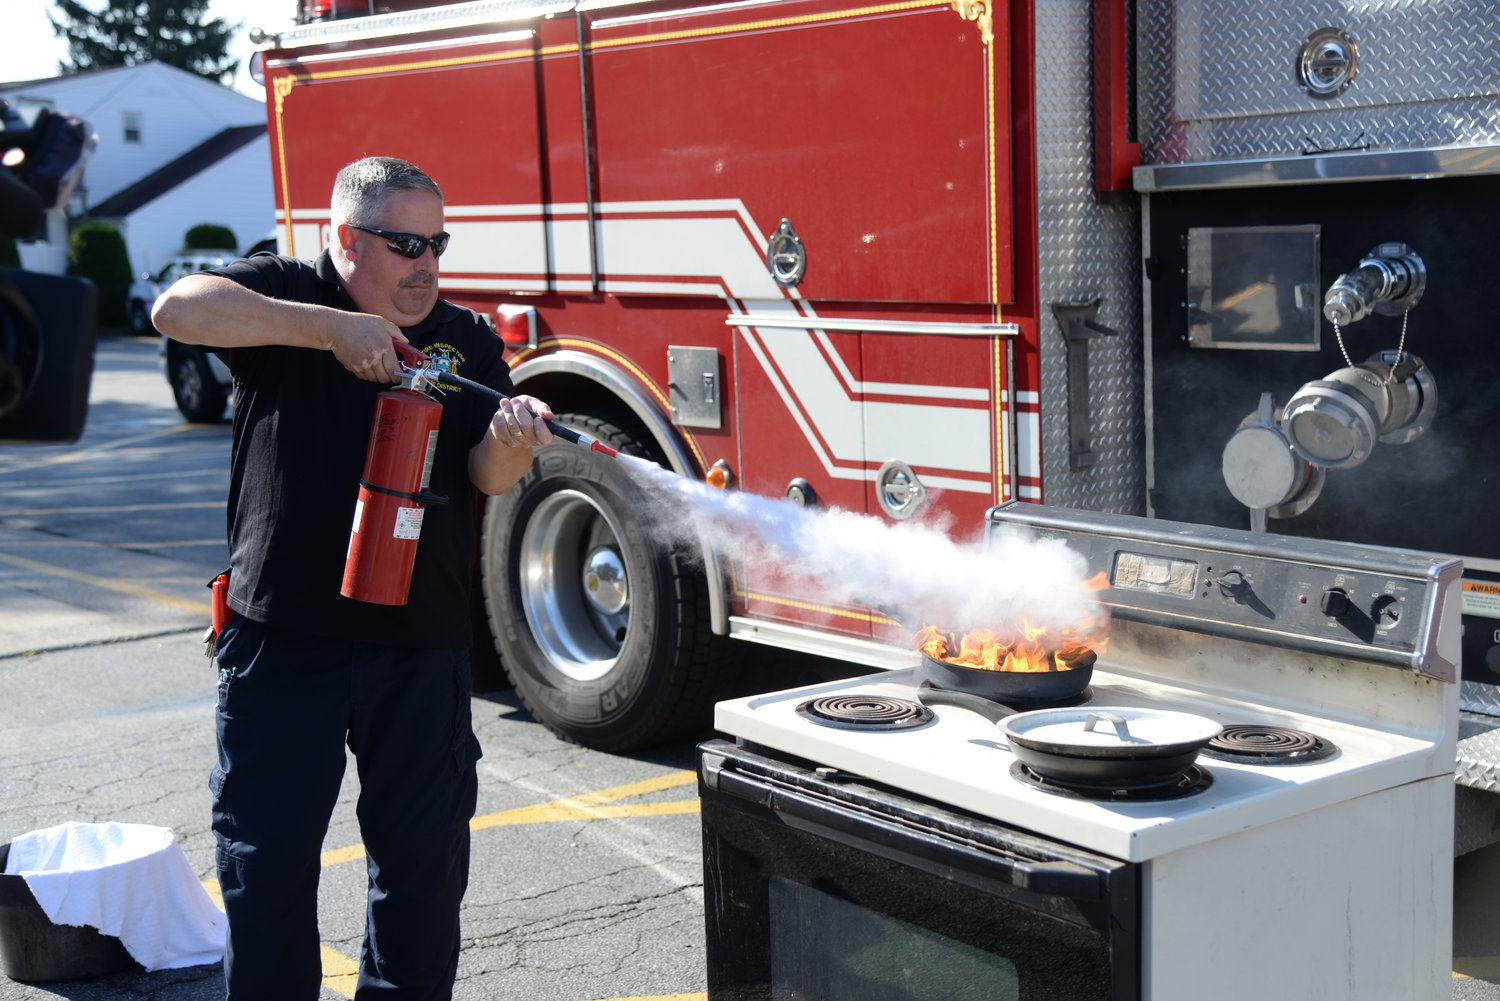 EMFD Fire Inspector and Ex-Chief James Kane demonstrates how to put out a stove fire using a fire extinguisher.